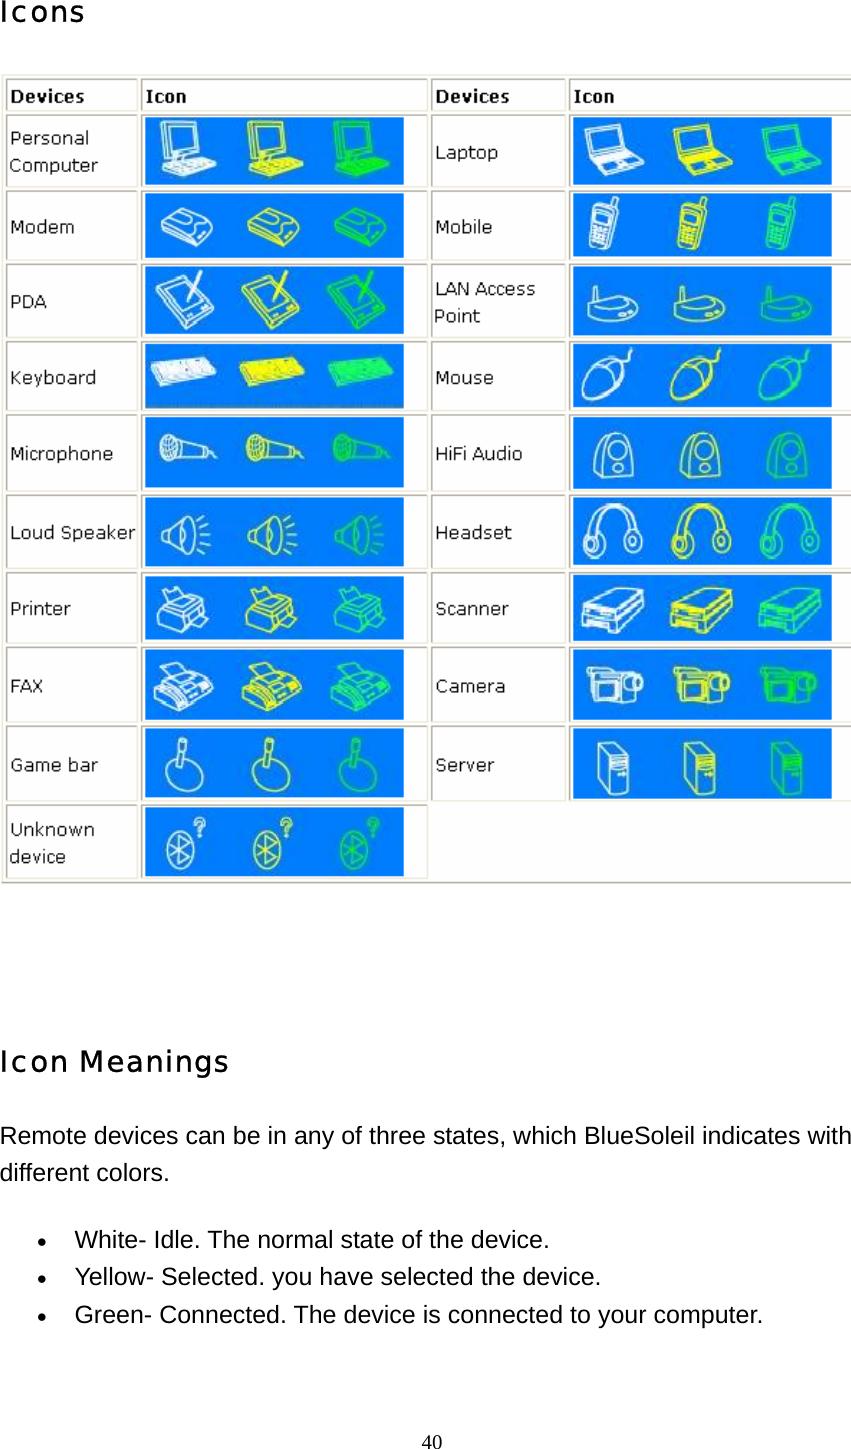   40Icons   Icon Meanings  Remote devices can be in any of three states, which BlueSoleil indicates with different colors.   • White- Idle. The normal state of the device.   • Yellow- Selected. you have selected the device.   • Green- Connected. The device is connected to your computer.   